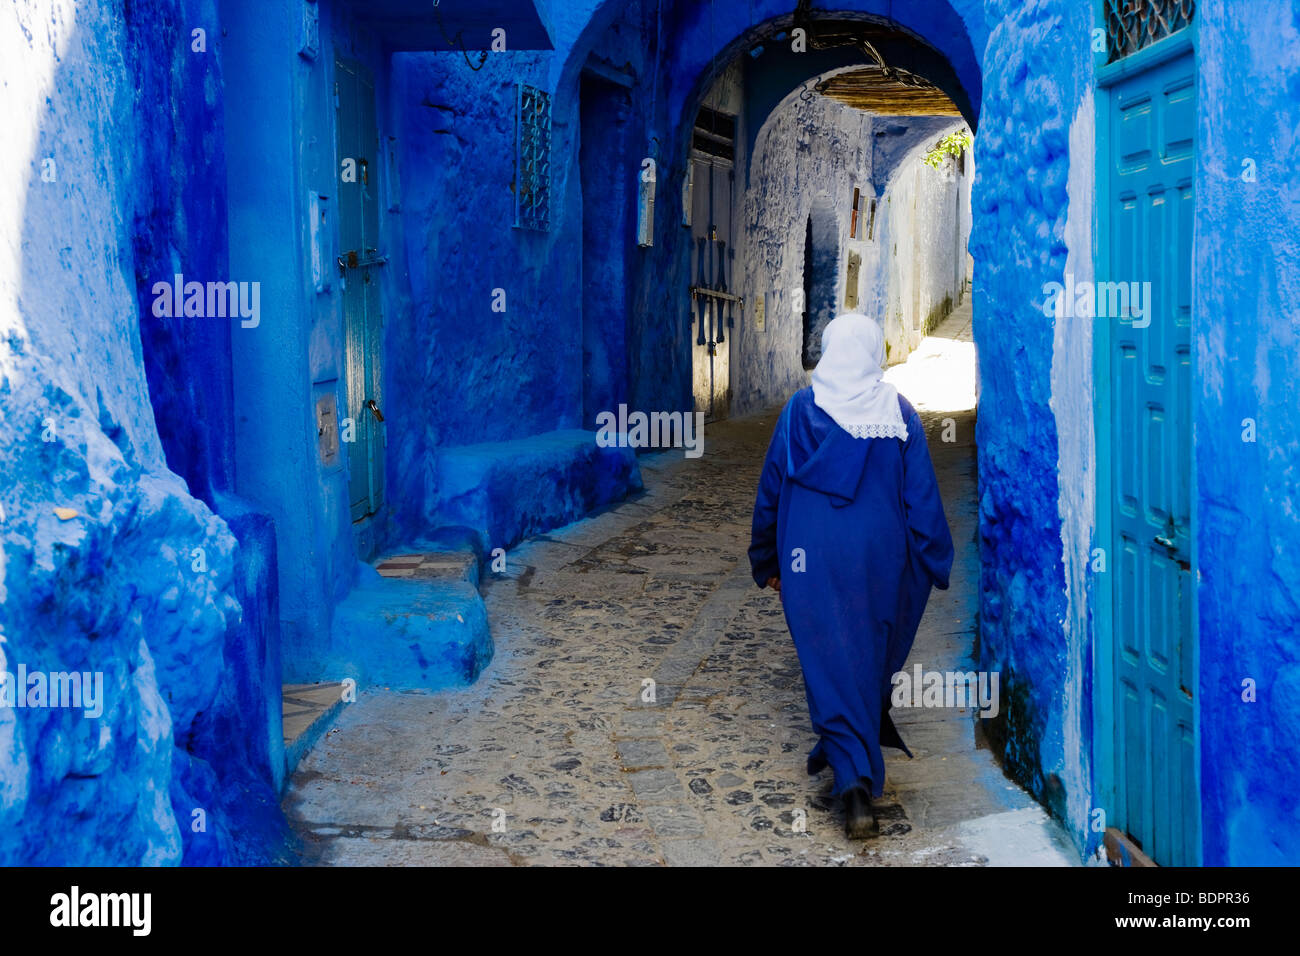 Chefchaouen, woman in blue jalaba and traditional blue-painted doors and walls in the old town. Stock Photo